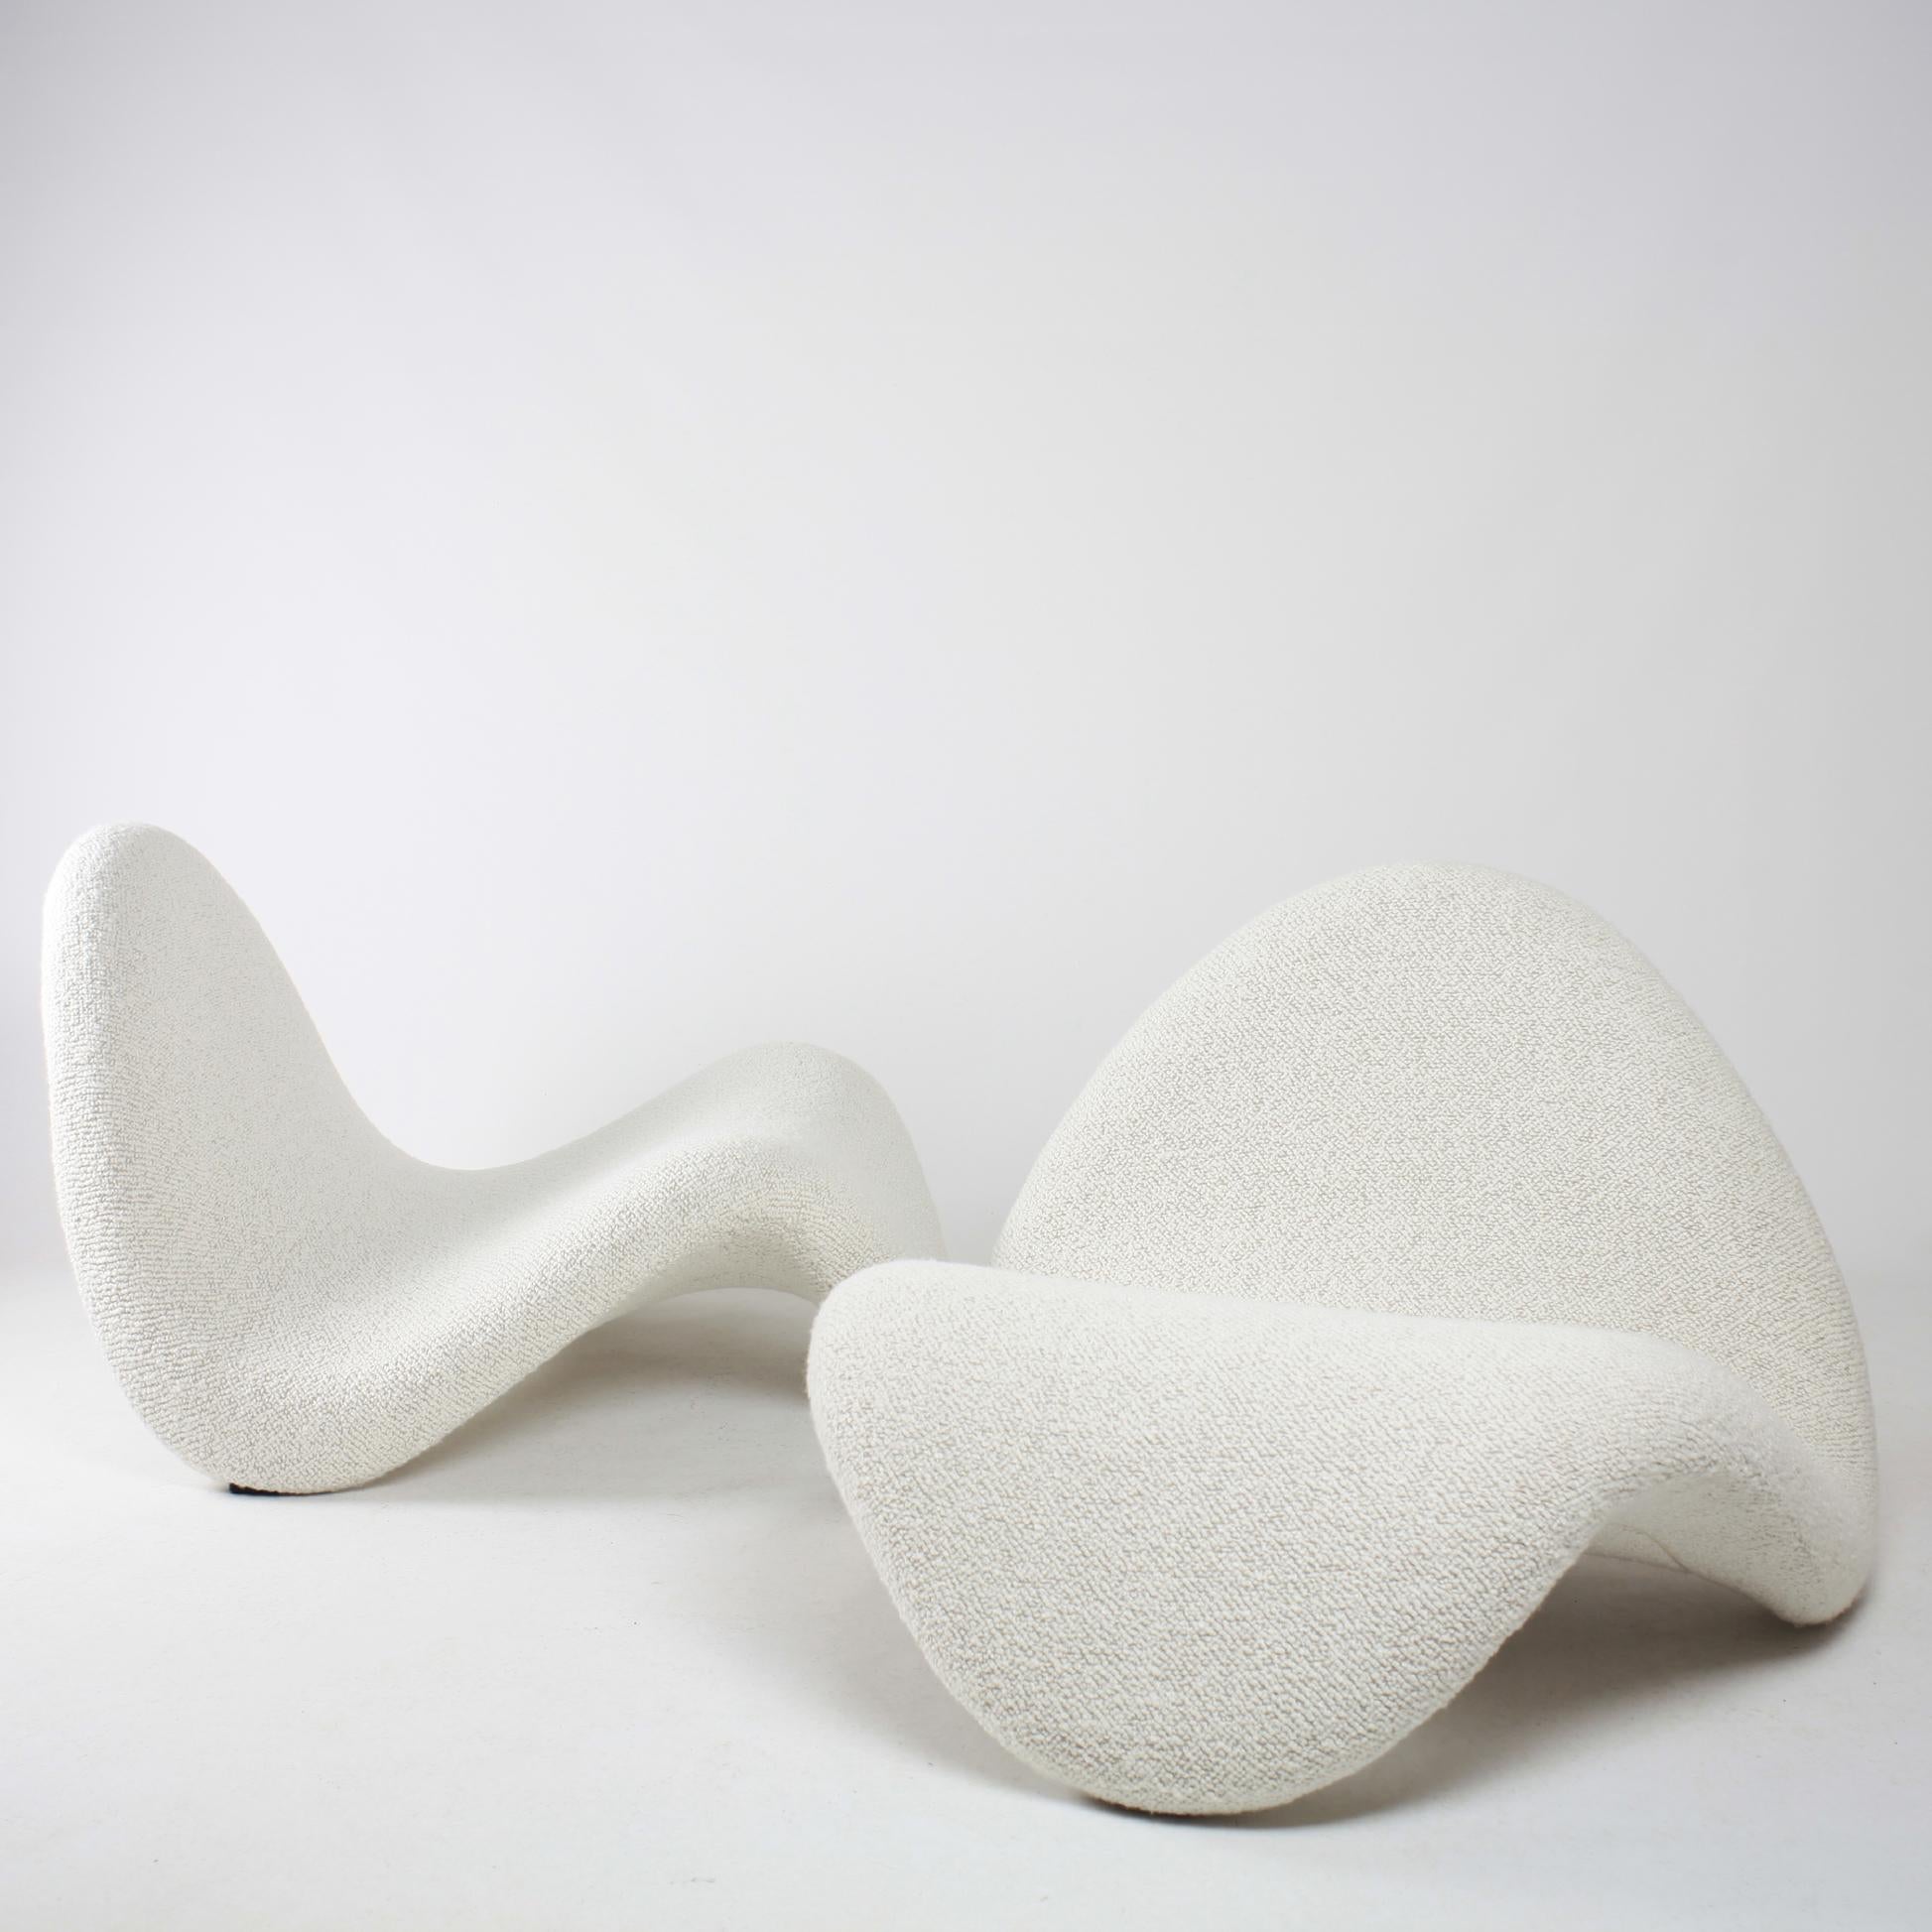 Pair of Iconic F577 Tongue chair designed by Pierre Paulin for Artifort in the sixties.
Reupholstered in Pierre Frey Bouclette.